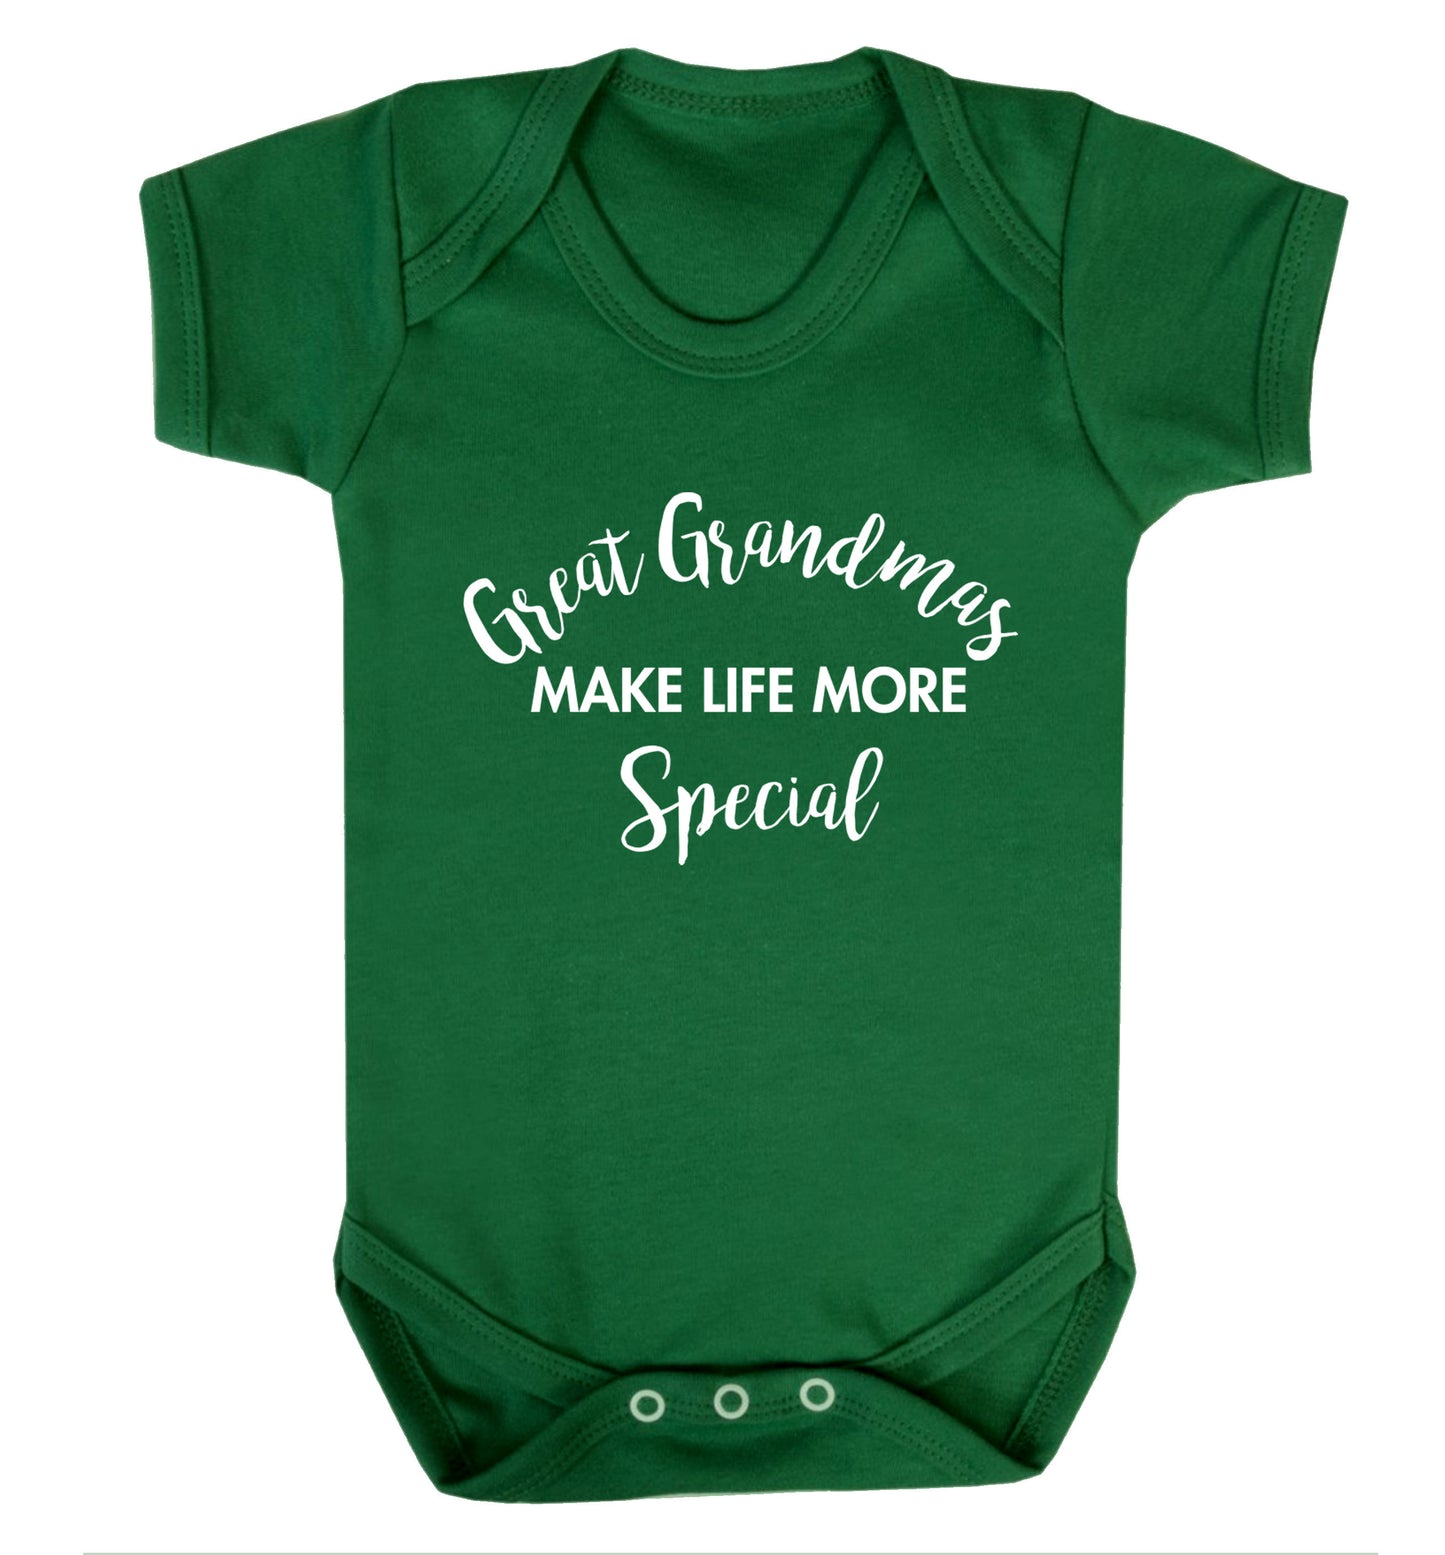 Great Grandmas make life more special Baby Vest green 18-24 months